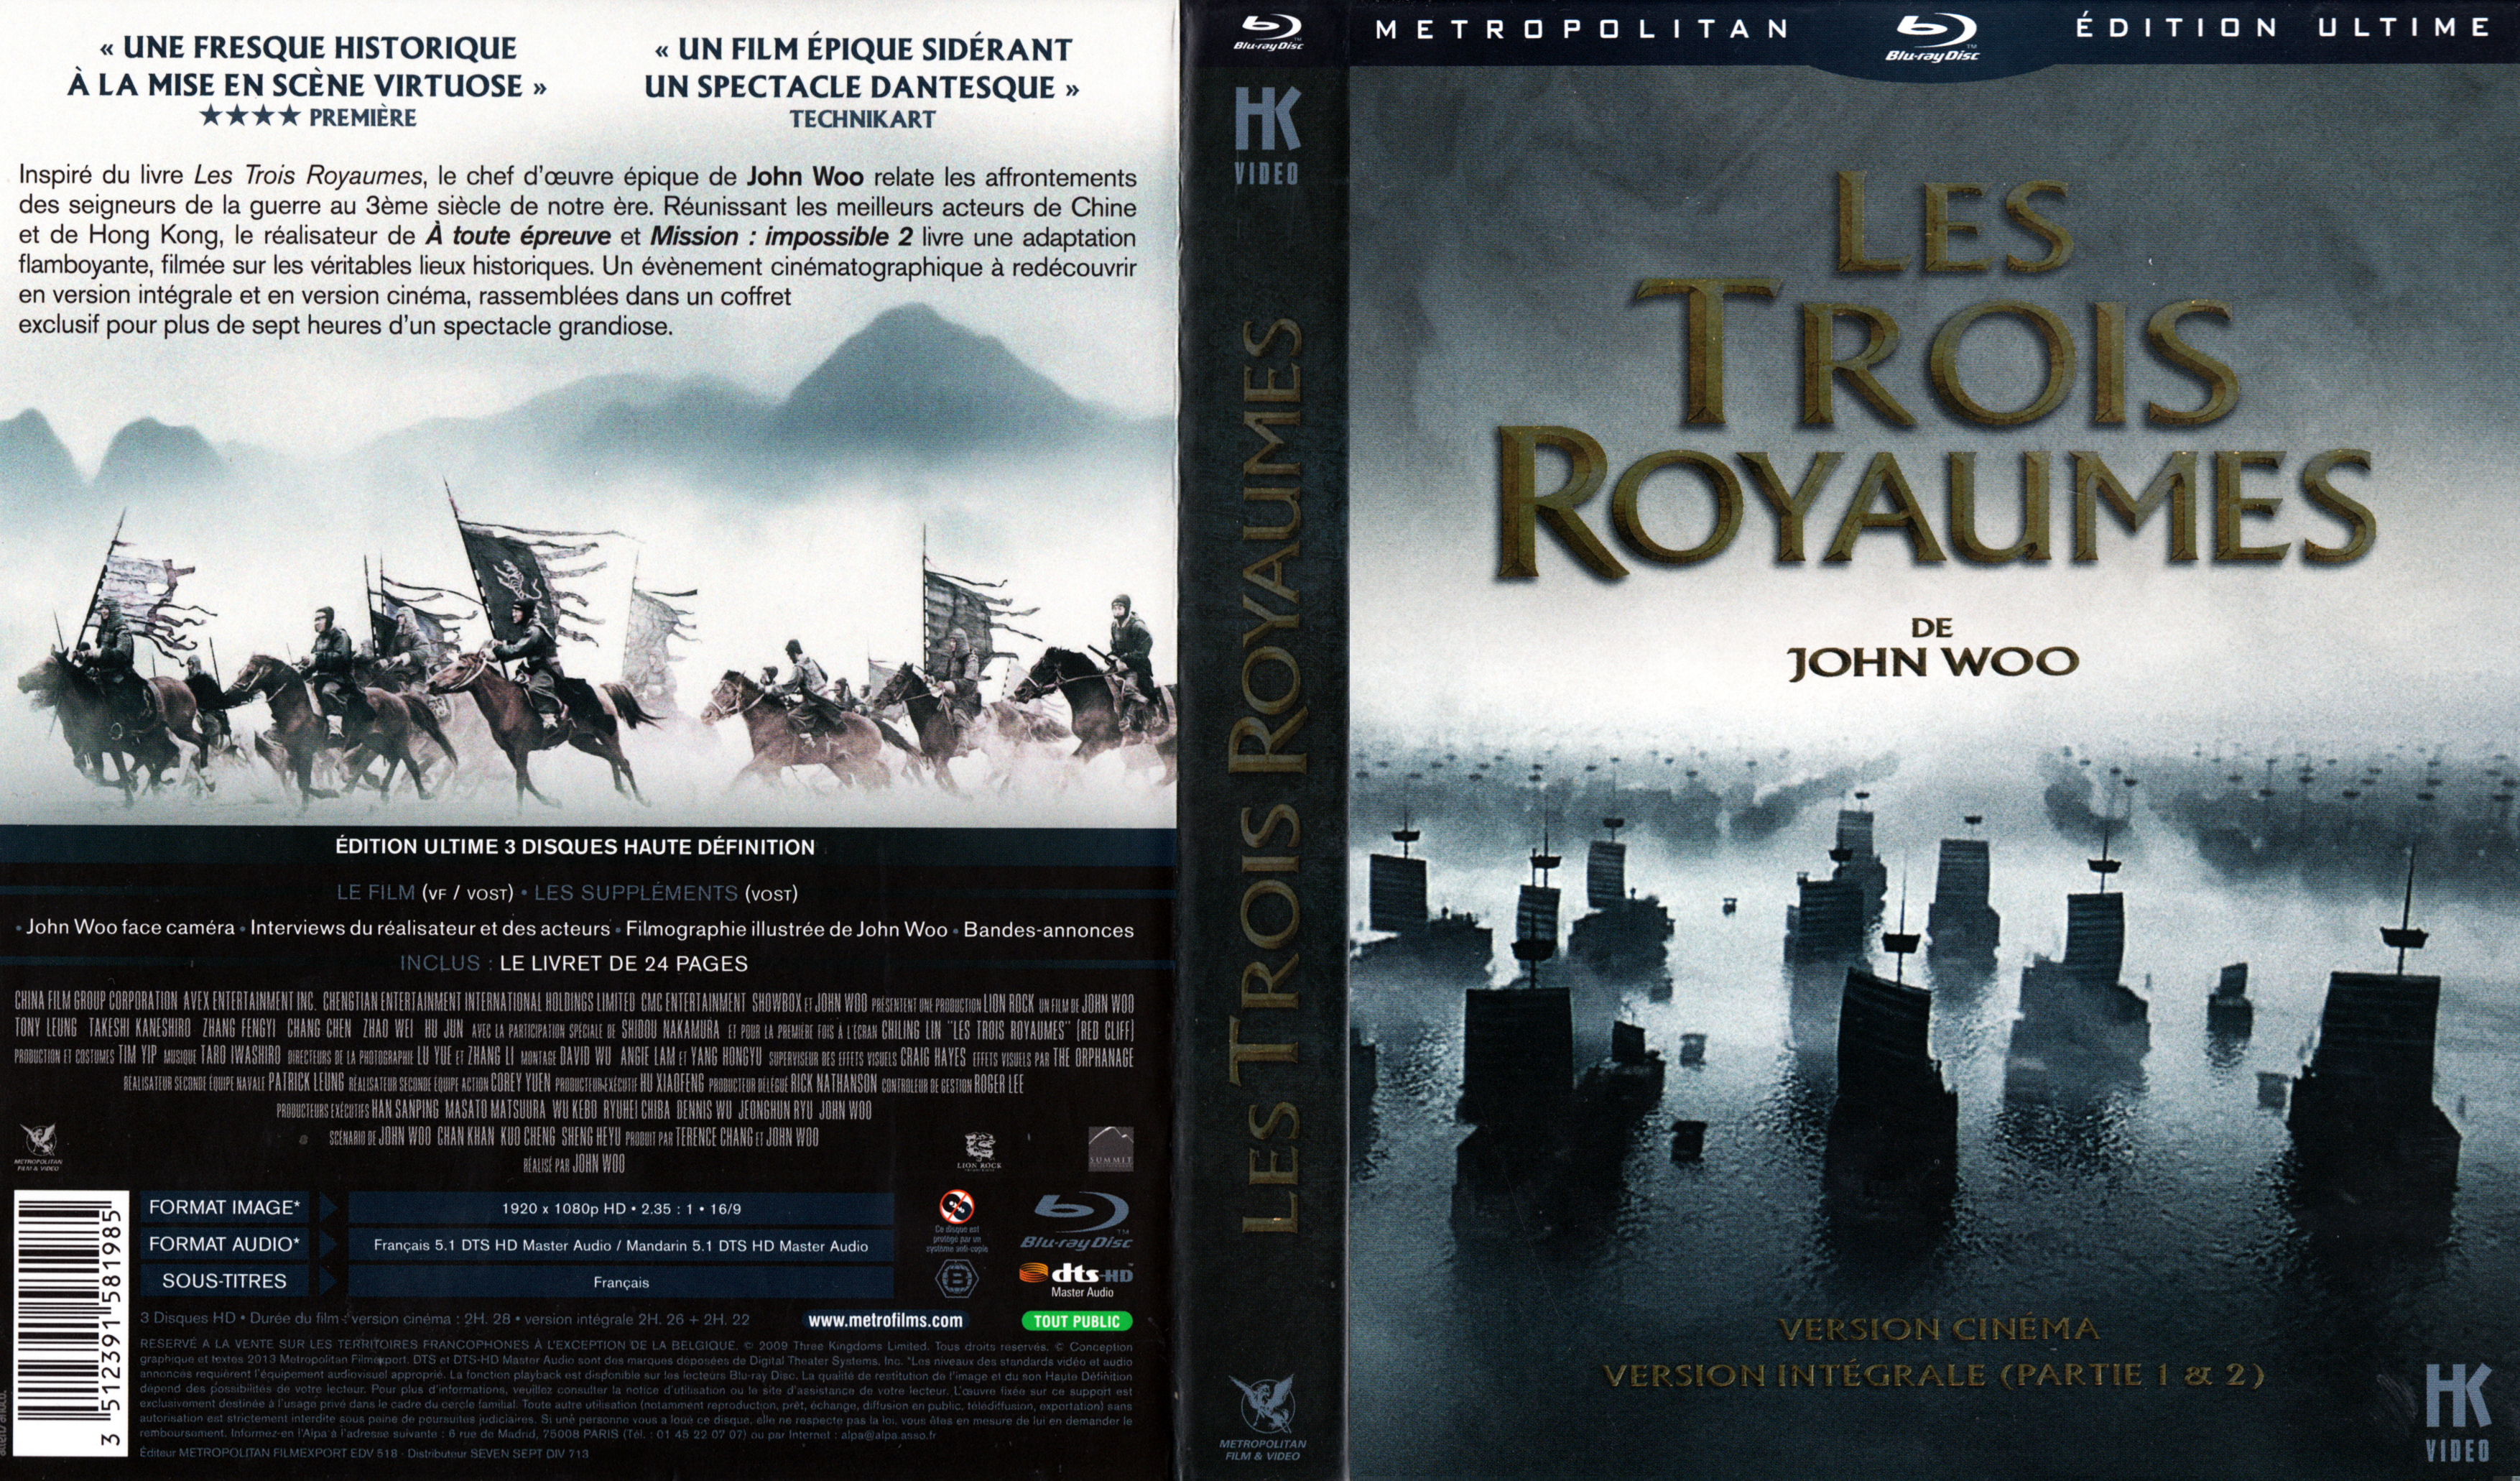 Jaquette DVD Les trois royaumes (BLU-RAY)